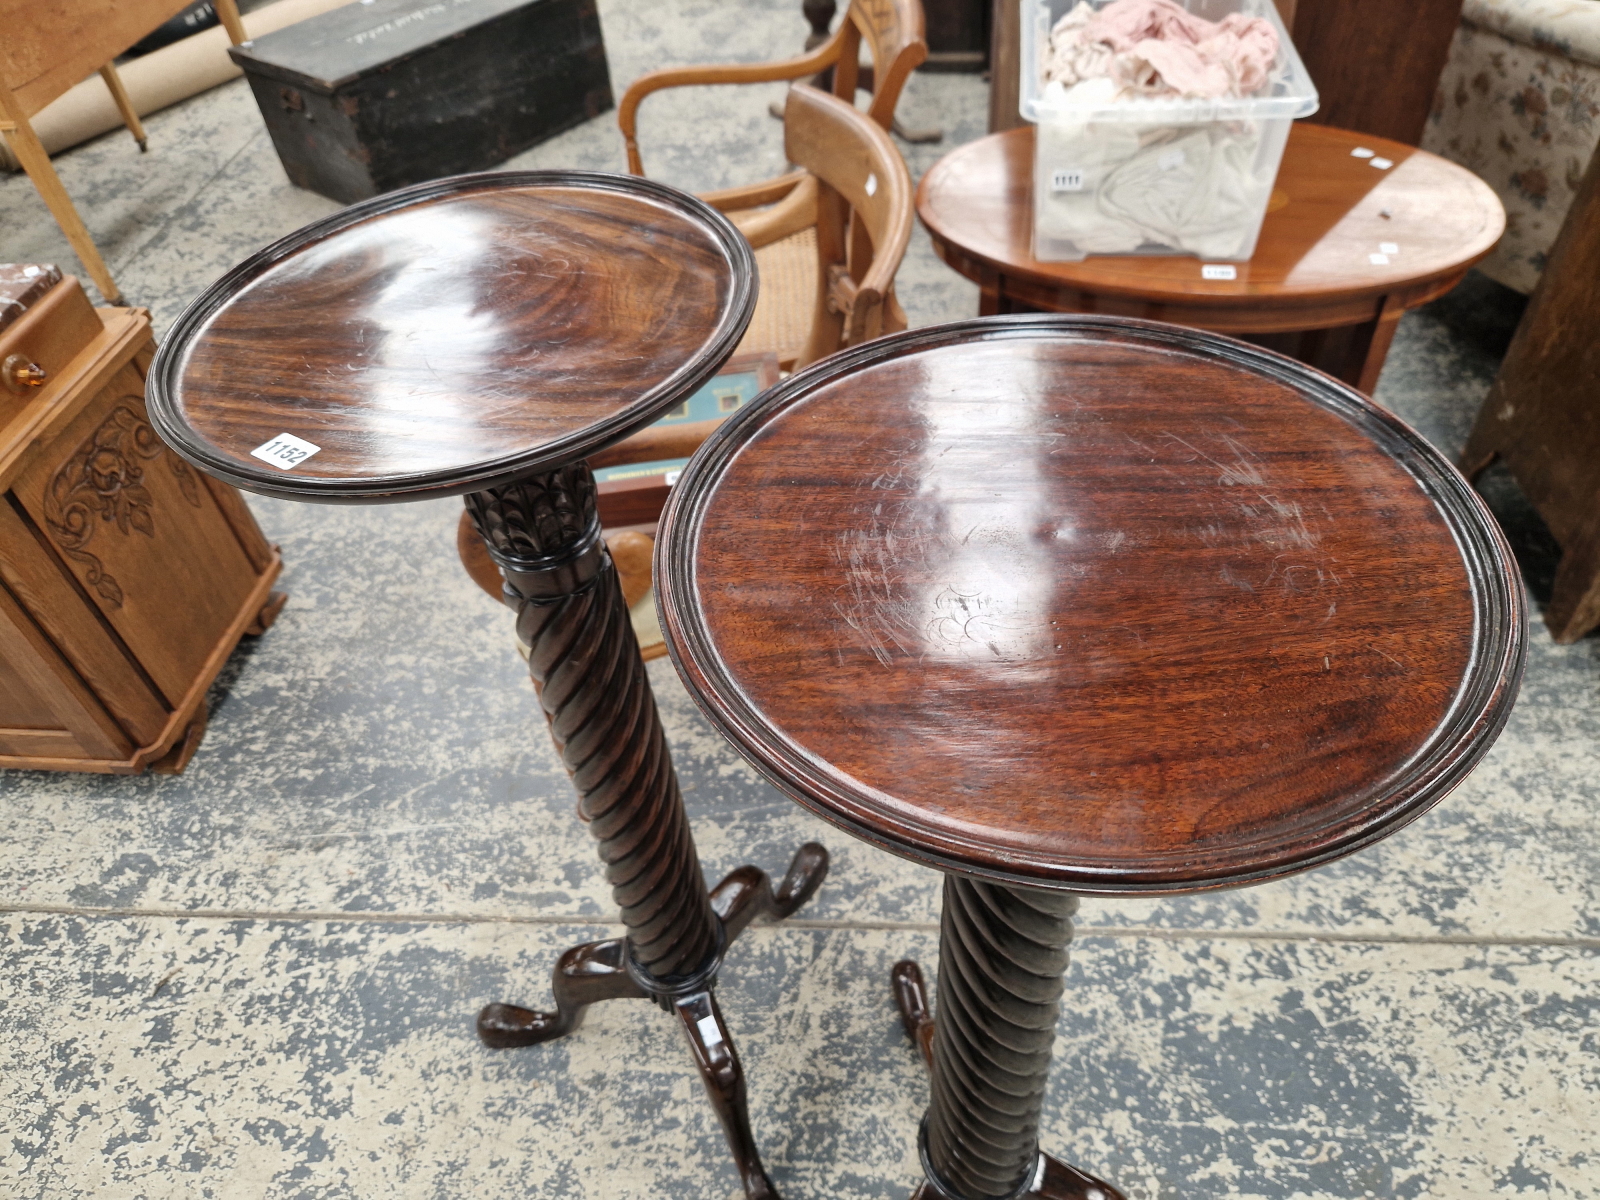 A PAIR OF MAHOGANY TORCHERES, THE DISHED CIRCULAR TOPS ON SPIRAL TWIST COLUMNS AND TRIPODS - Image 6 of 7